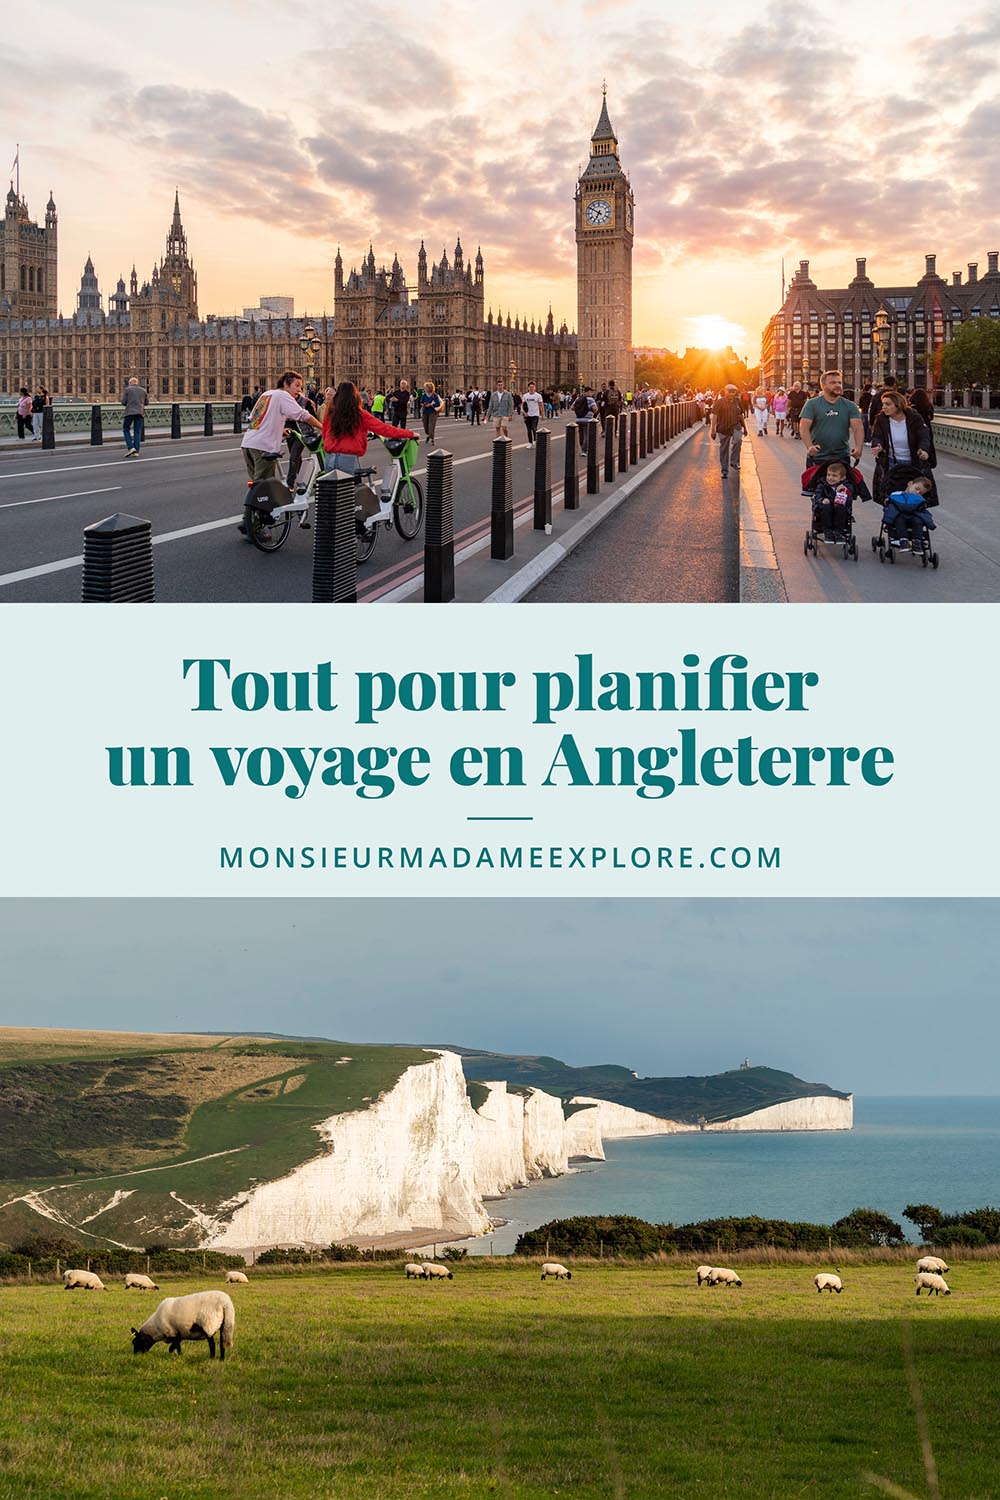 Guide pour planifier un voyage en Angleterre, Monsieur+Madame Explore, Blogue de voyage, Angleterre, UK / Everything you need to know to organize your trip in England, UK